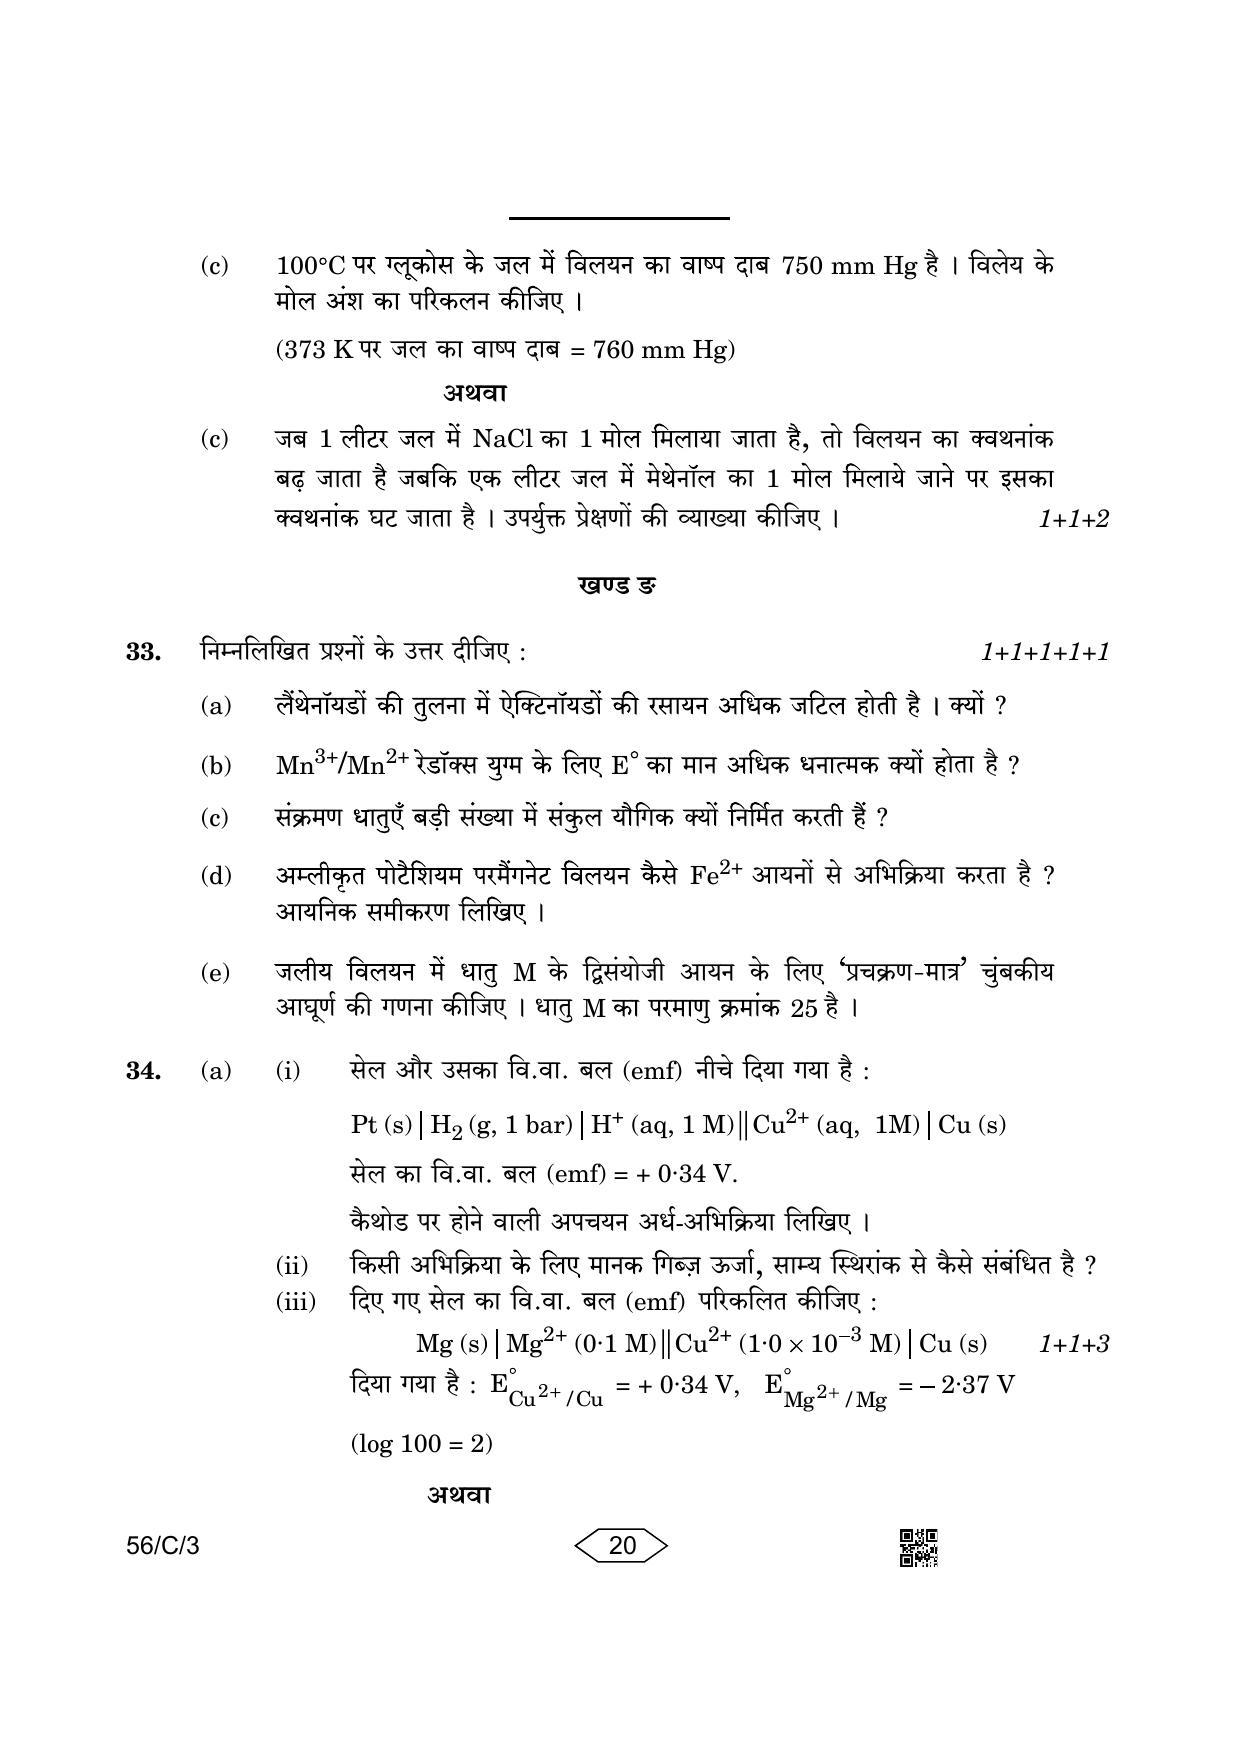 CBSE Class 12 56-3 Chemistry 2023 (Compartment) Question Paper - Page 20